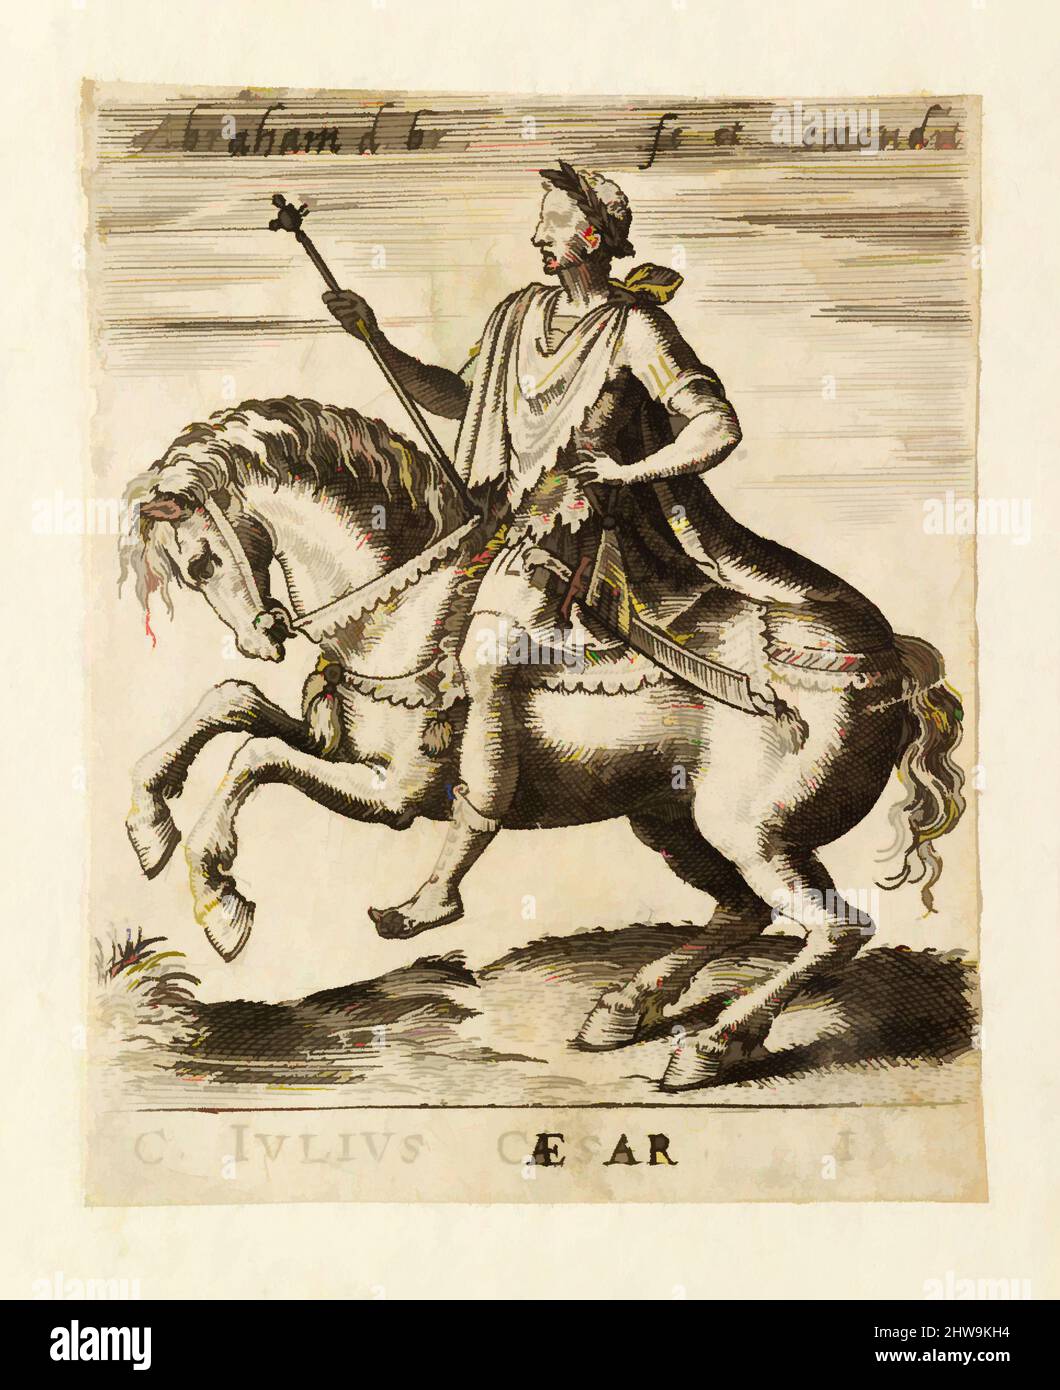 Art inspired by Drawings and Prints, Print, C. Julius Caesar from Twelve Caesars on Horseback, Artist, Abraham de Bruyn, Flemish, Antwerp 1540, Classic works modernized by Artotop with a splash of modernity. Shapes, color and value, eye-catching visual impact on art. Emotions through freedom of artworks in a contemporary way. A timeless message pursuing a wildly creative new direction. Artists turning to the digital medium and creating the Artotop NFT Stock Photo